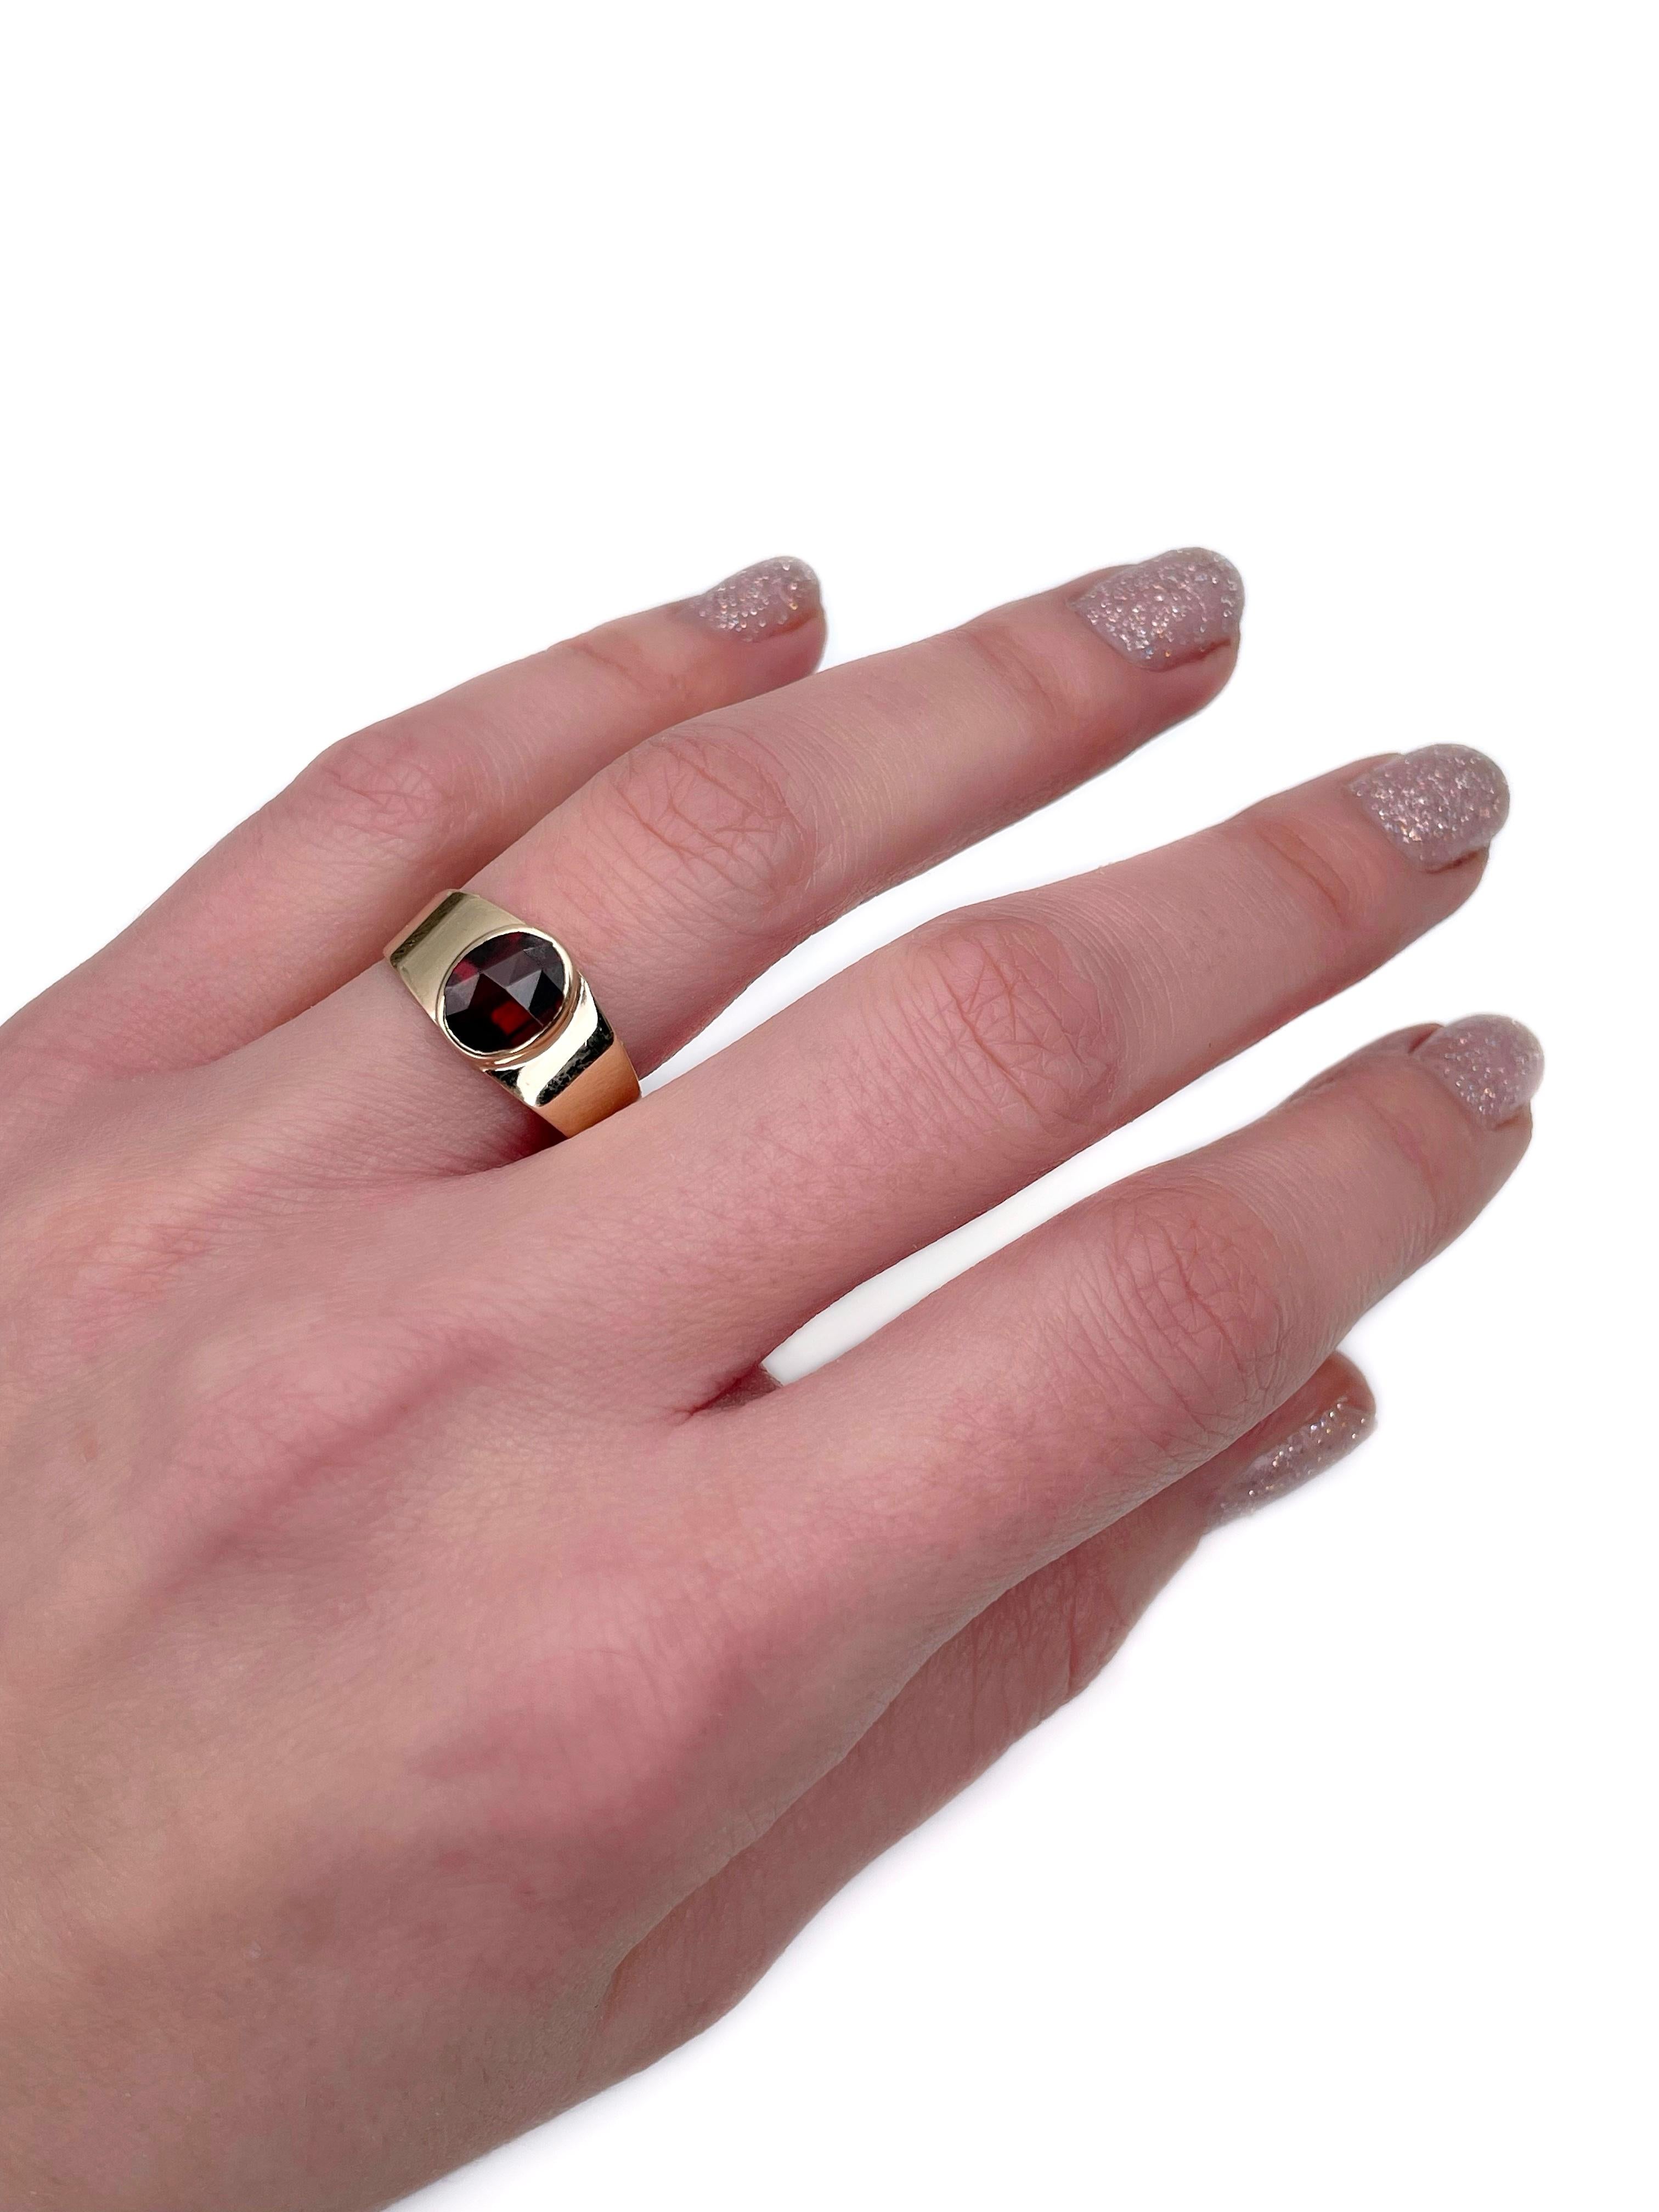 This is a mid XX century signet ring crafted in 14K gold. Circa 1950.

It features 1 oval rose cut garnet. Best visible in a video. 

Could be a perfect pinky ring. 

Weight: 2.82g 
Size: 16.25 (US 5.75)

IMPORTANT: please ask about the possibility